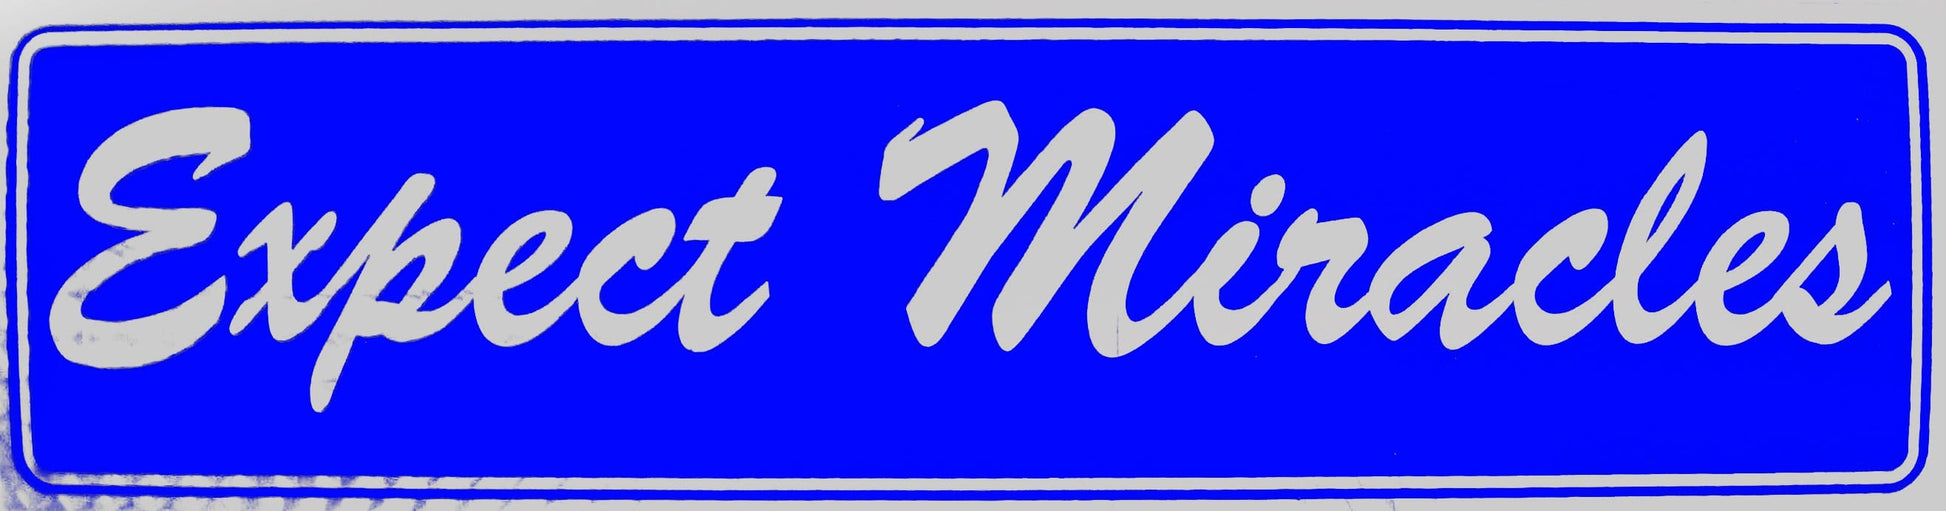 Expect Miracles Bumper Sticker Blue